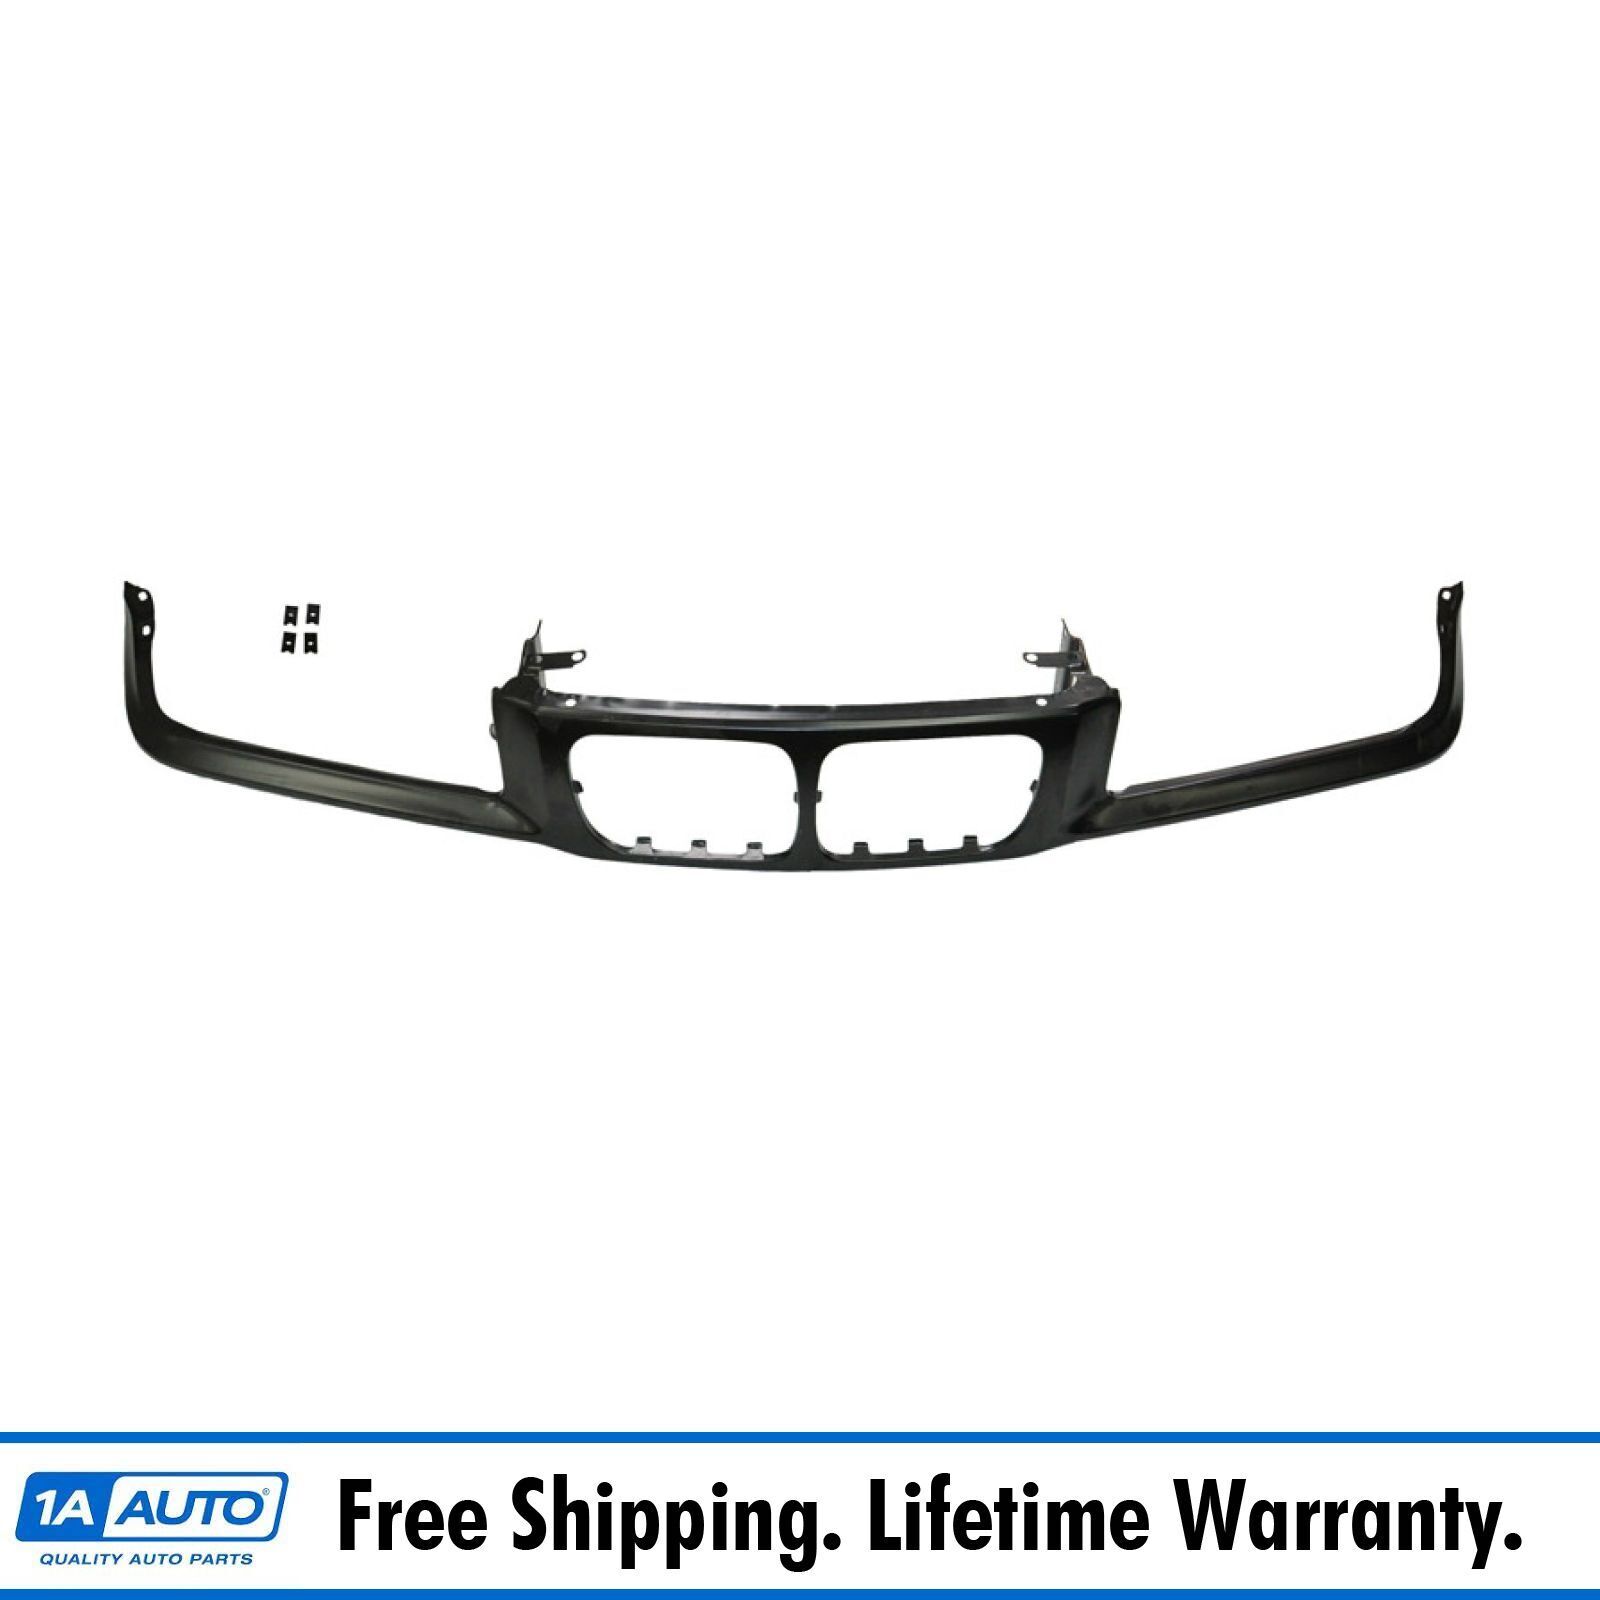 Header Headlight Grille Mounting Nose Panel for 97-99 BMW 3 Series E36